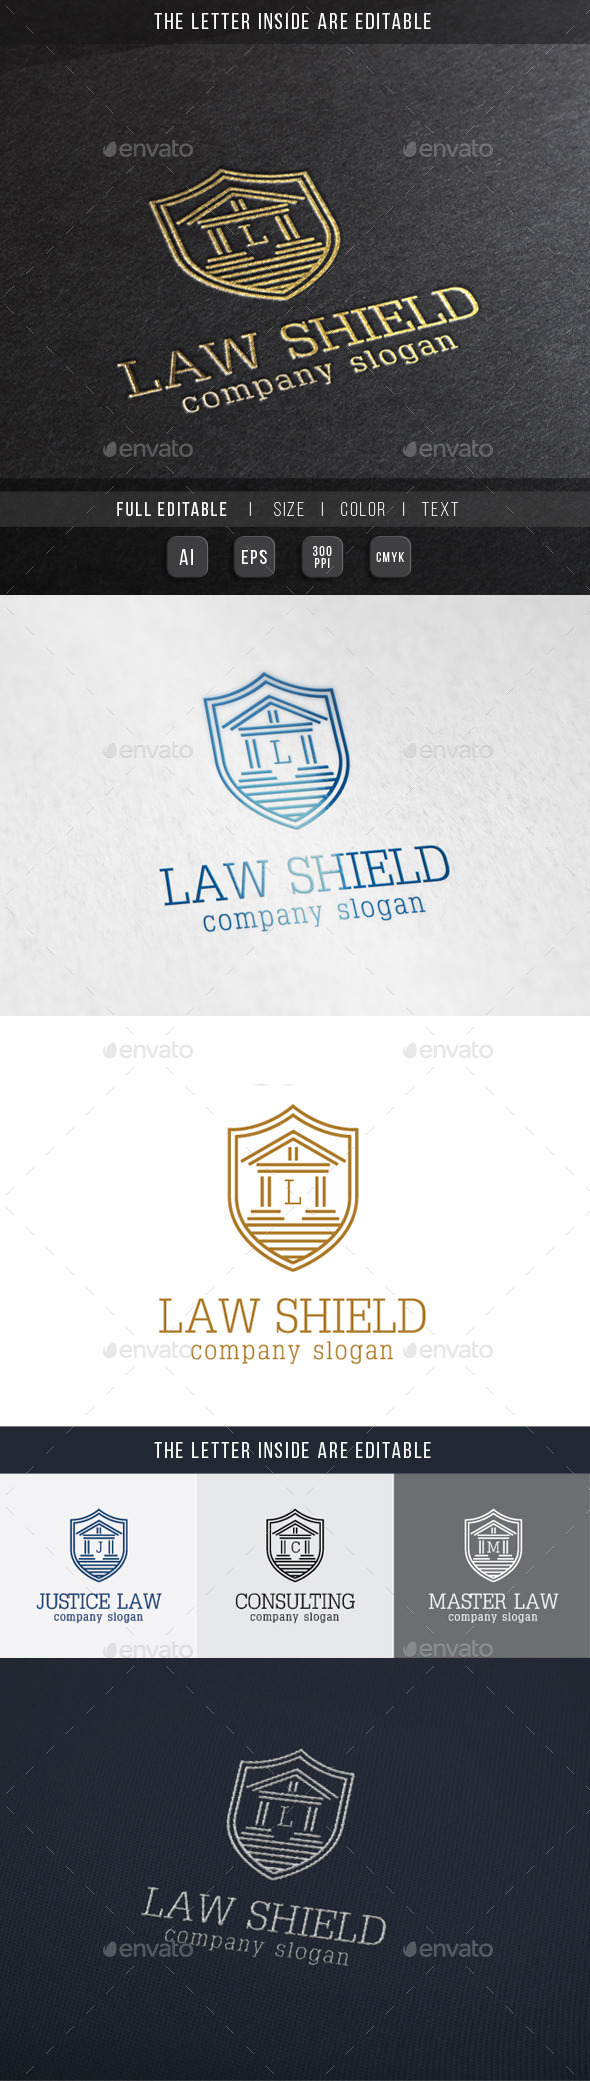 Law Shield - Justice Building Logo Template.